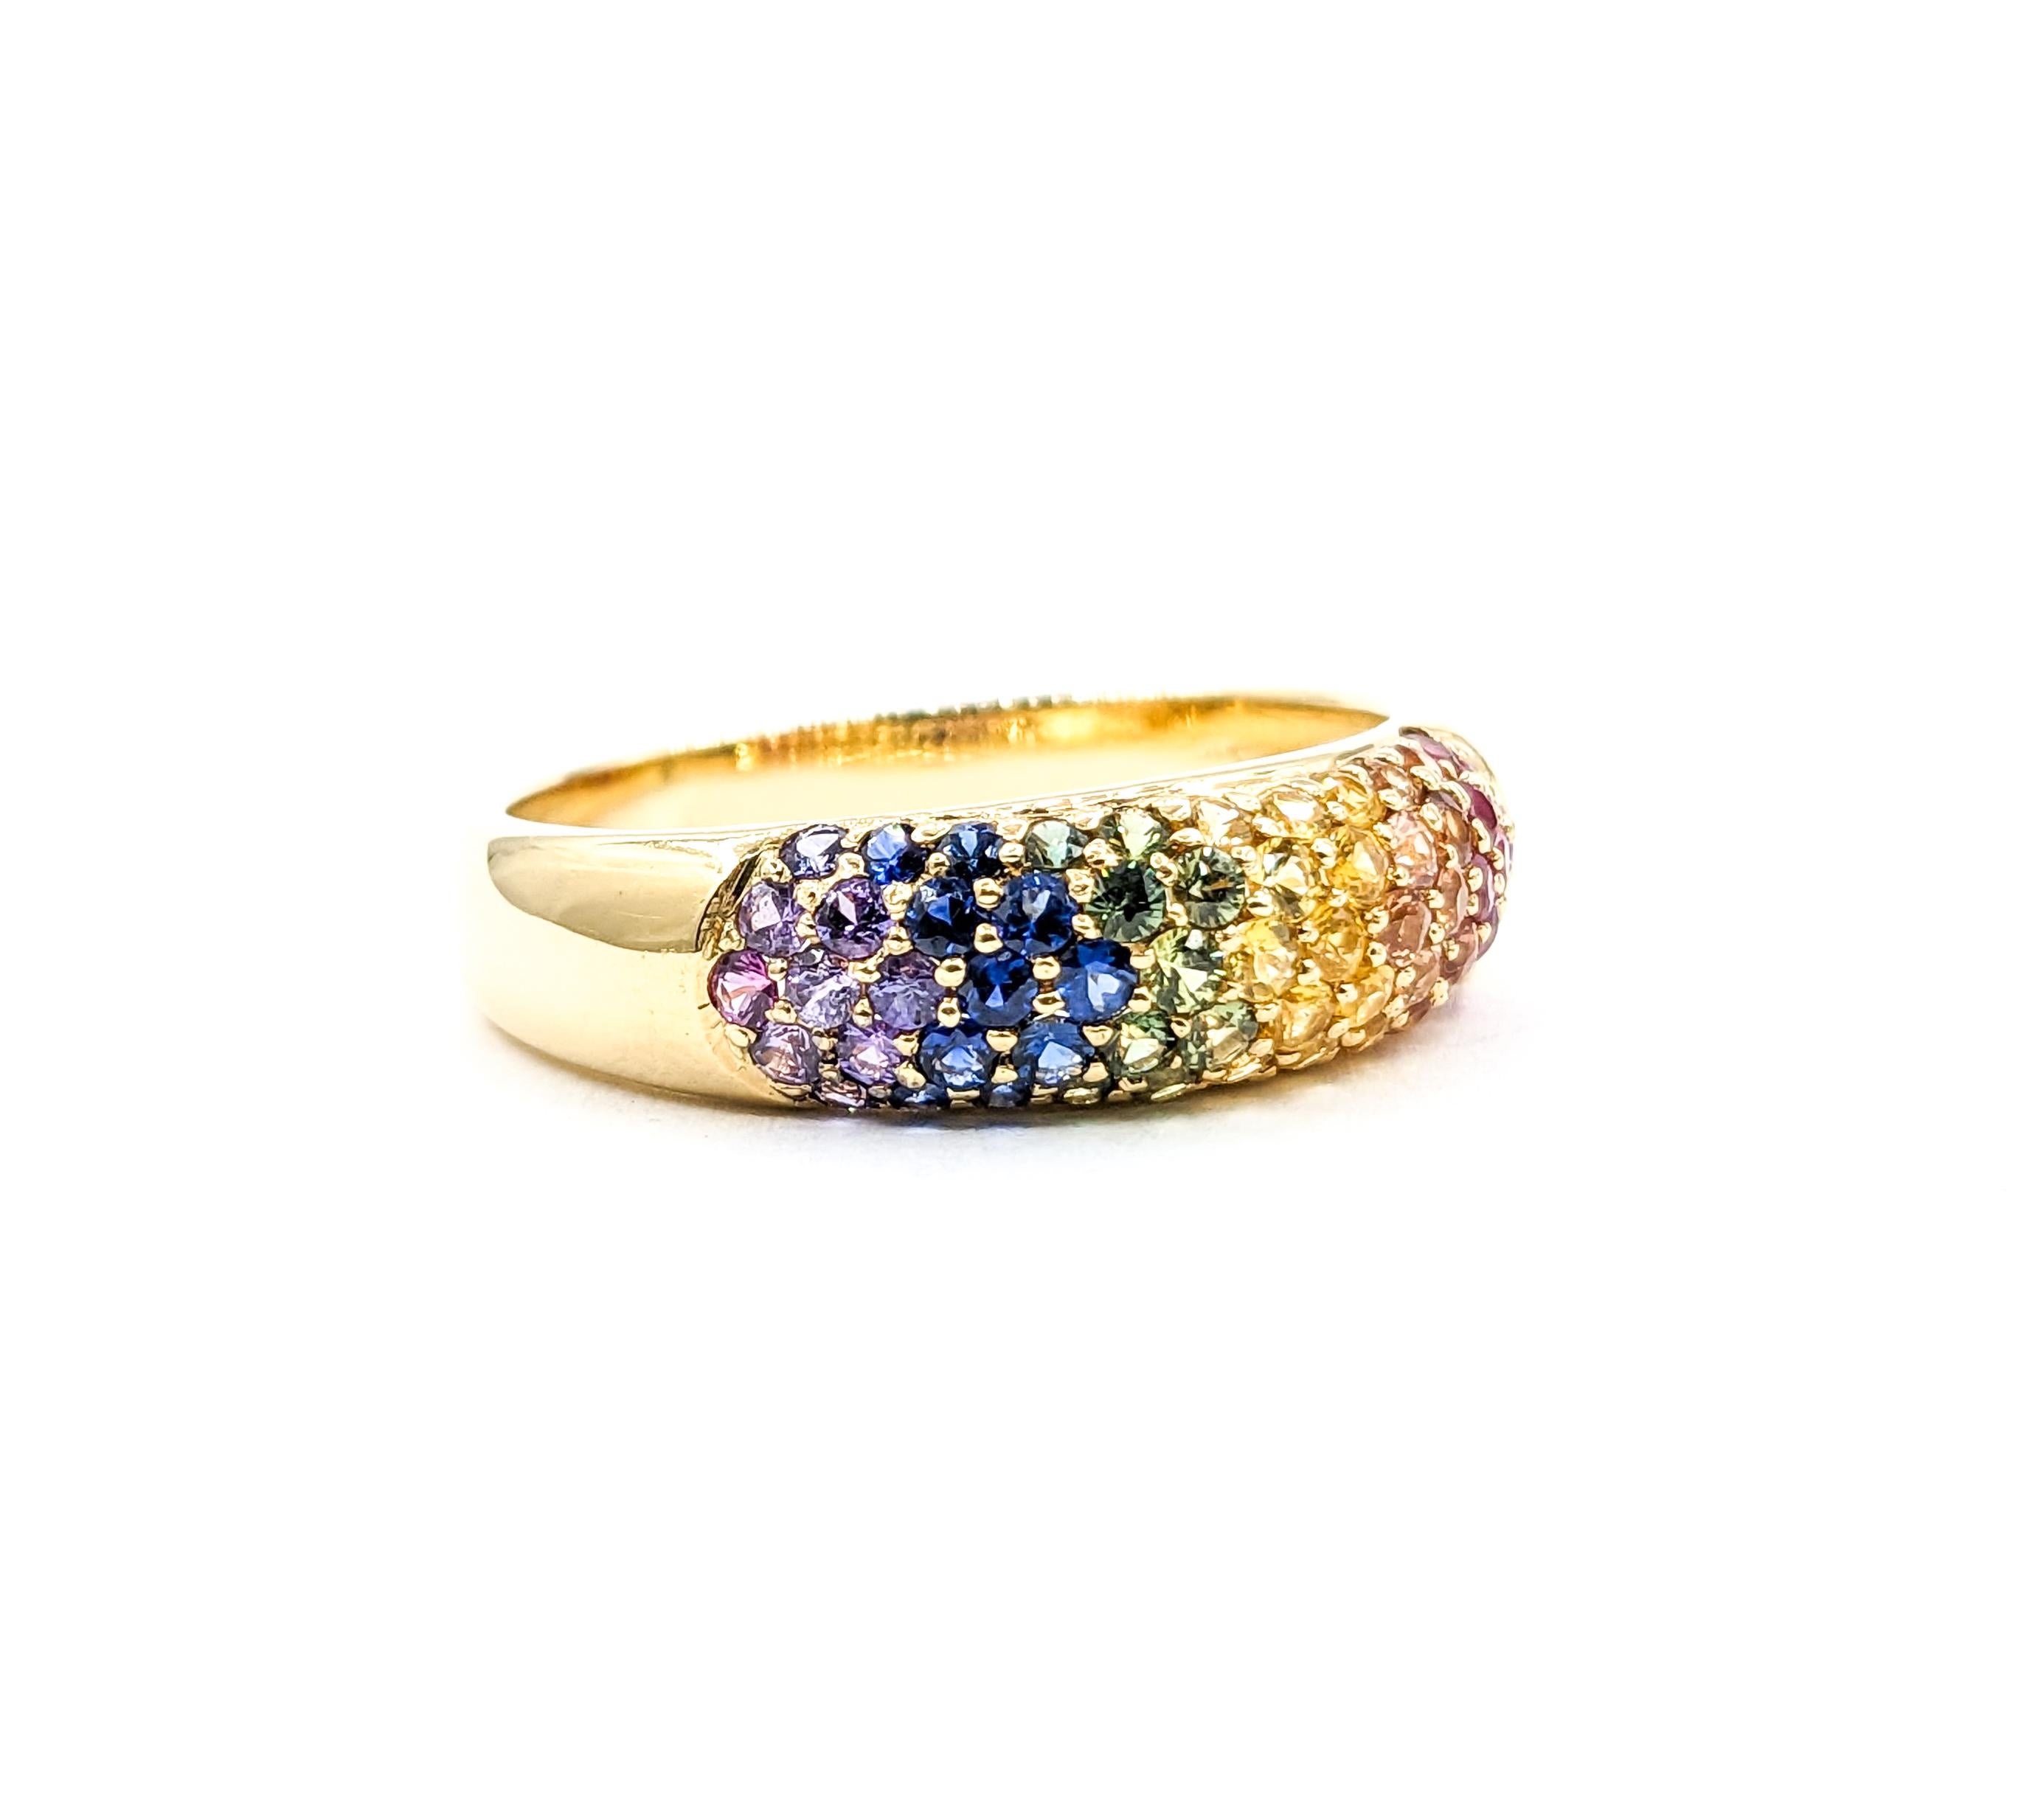 Colorful Rainbow Multicolor Topaz Pave Ring in Gold In Excellent Condition For Sale In Bloomington, MN